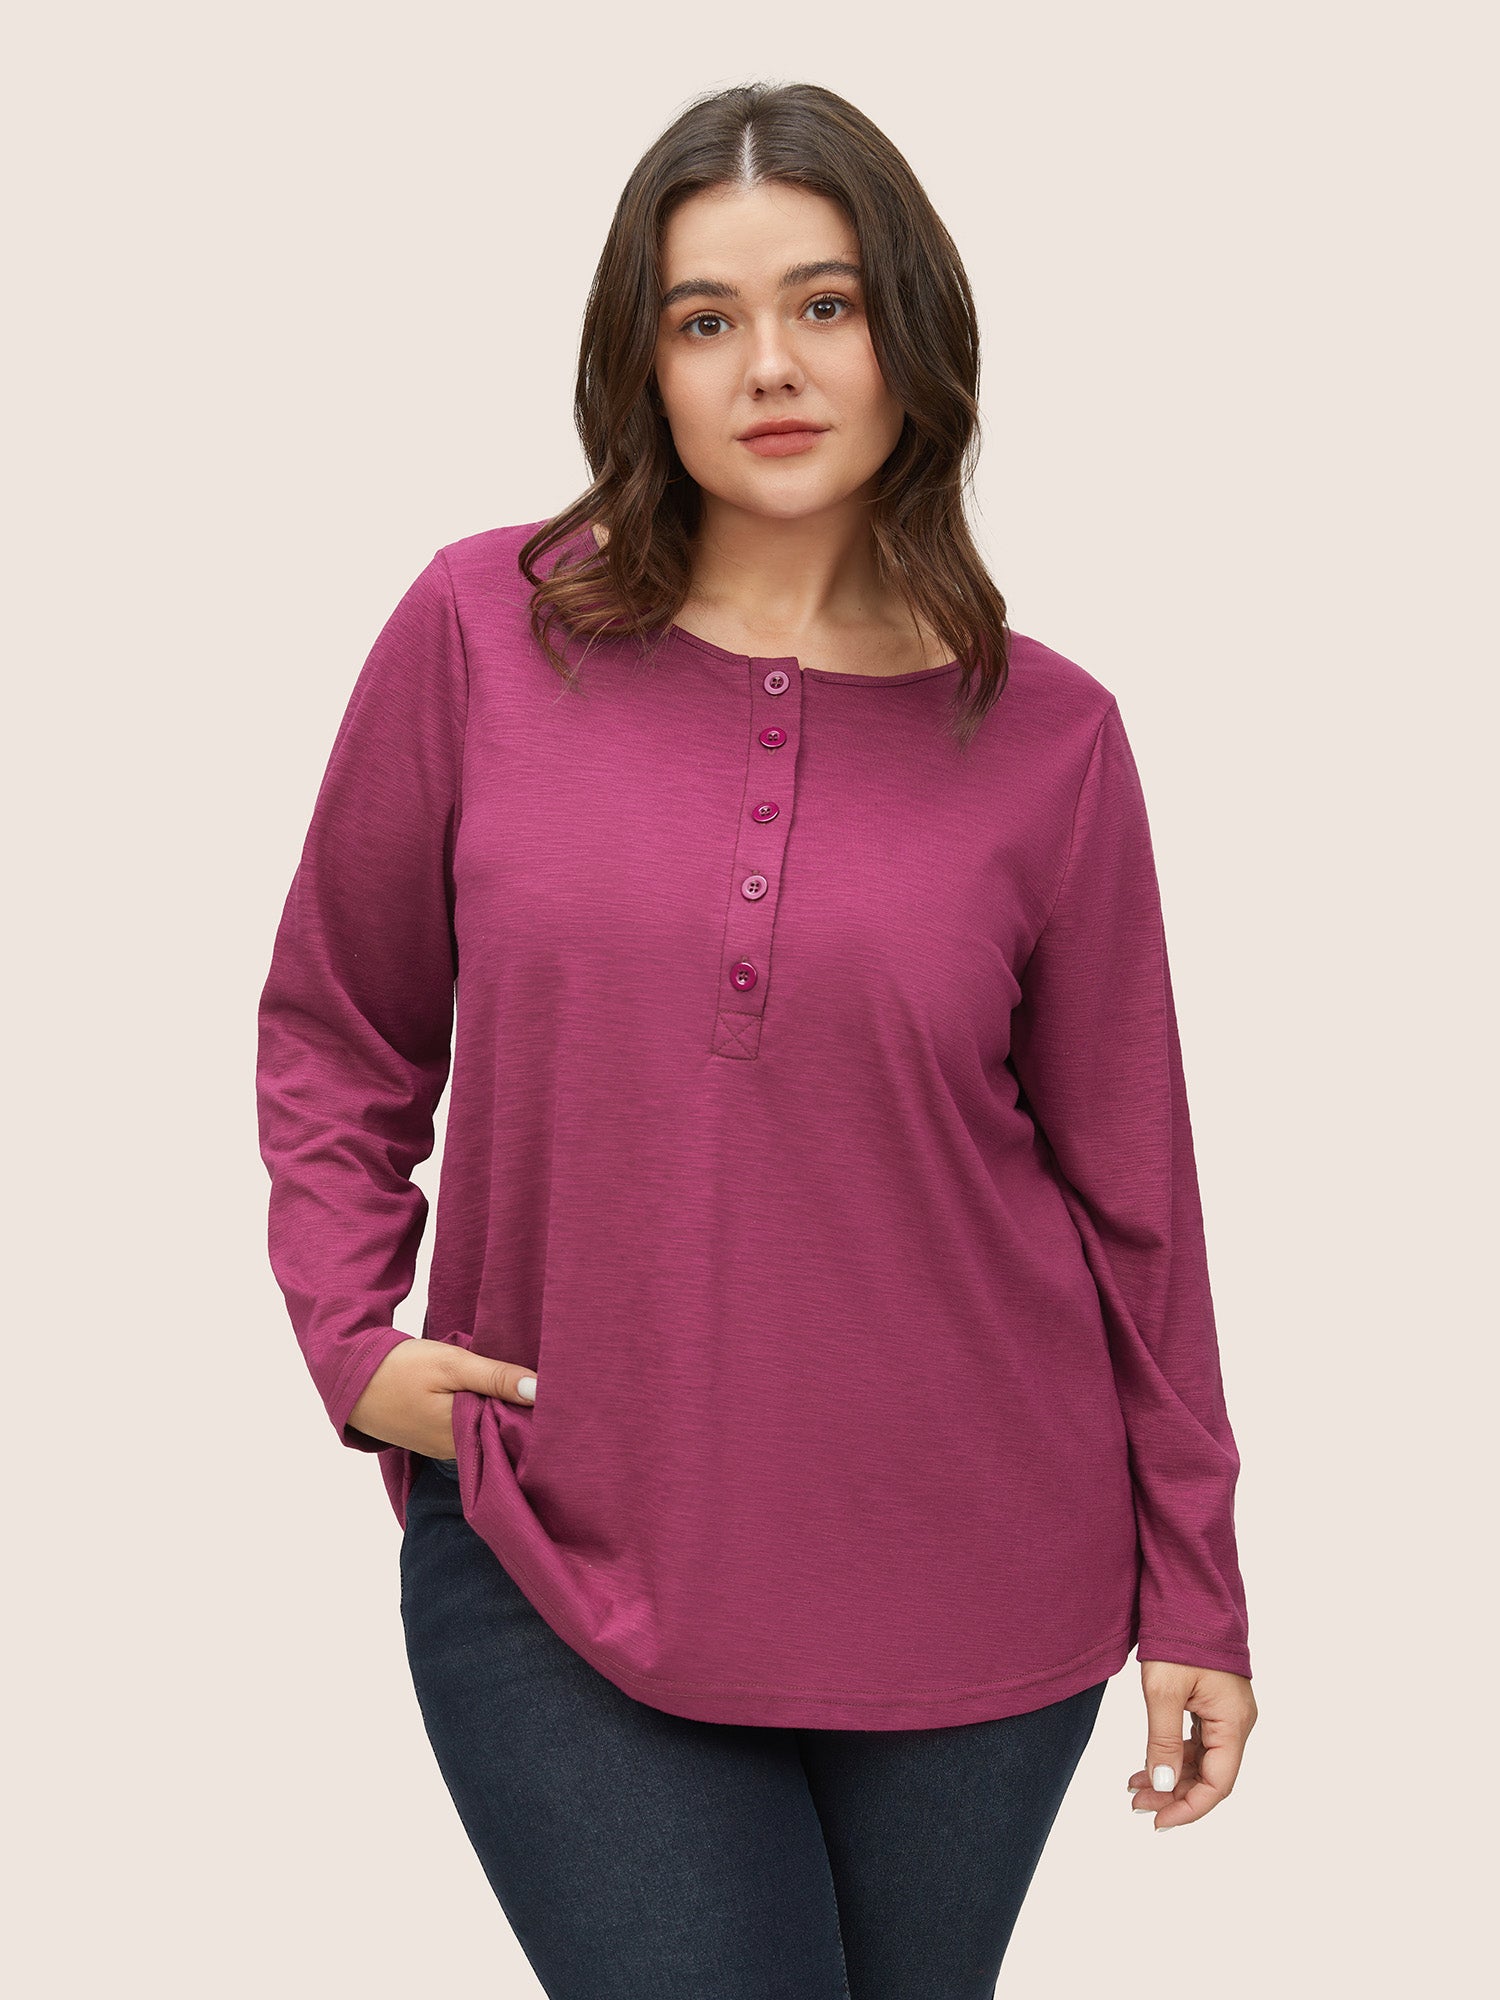 

Plus Size Women Everyday Plain Non Regular Sleeve Long Sleeve Open Front Casual T-shirts BloomChic, Red-violet